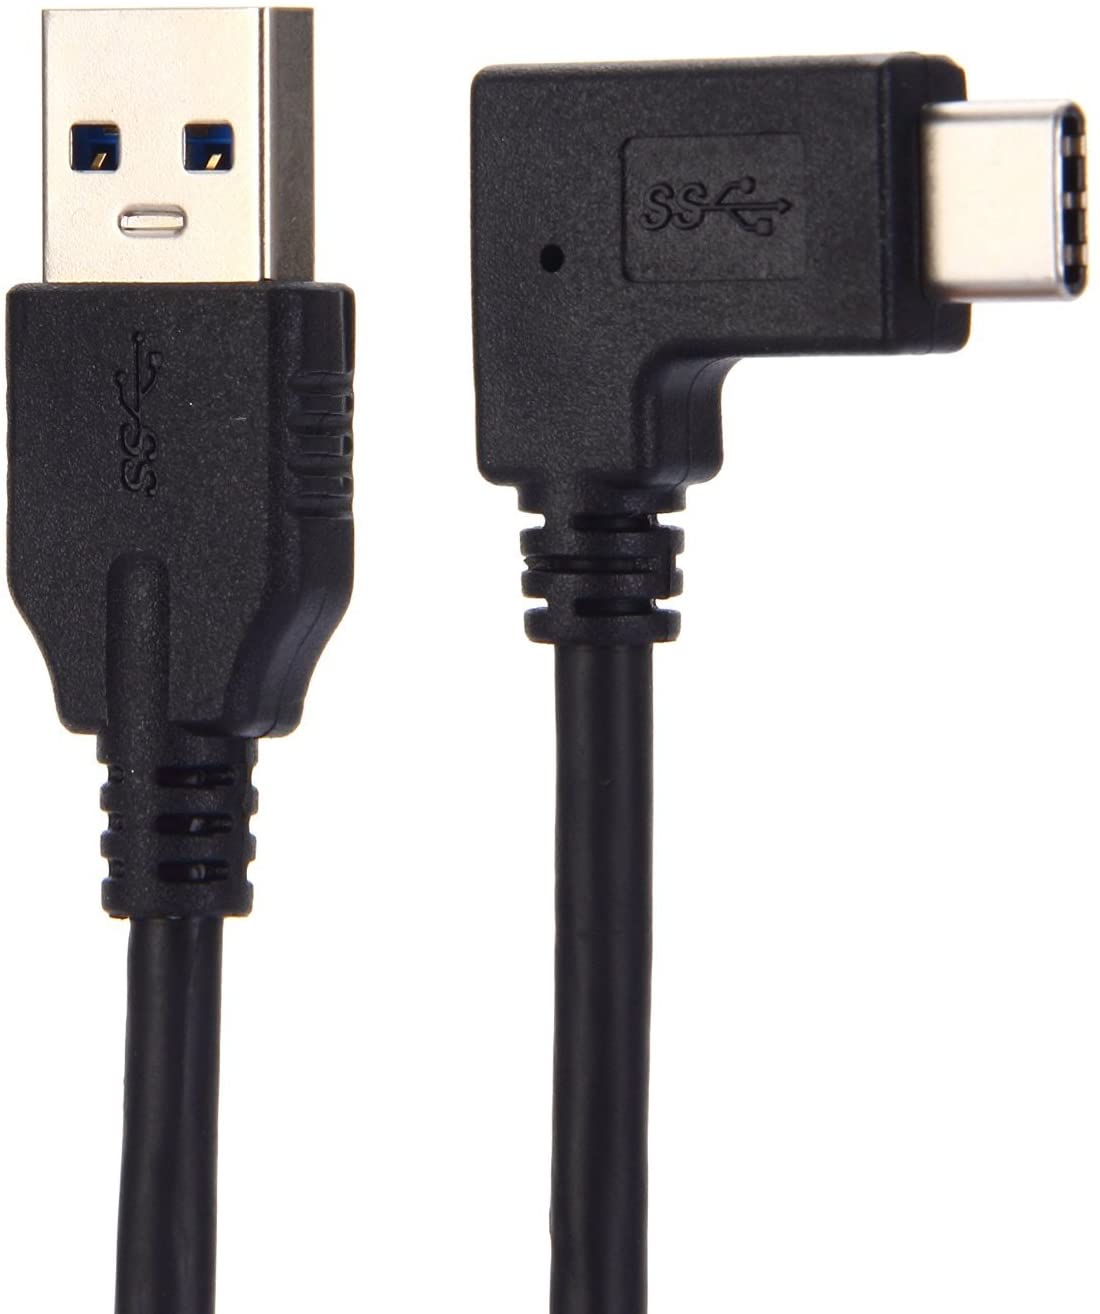 USB 3.0 A Male to USB C Angled Male Data Charging Cable 1m